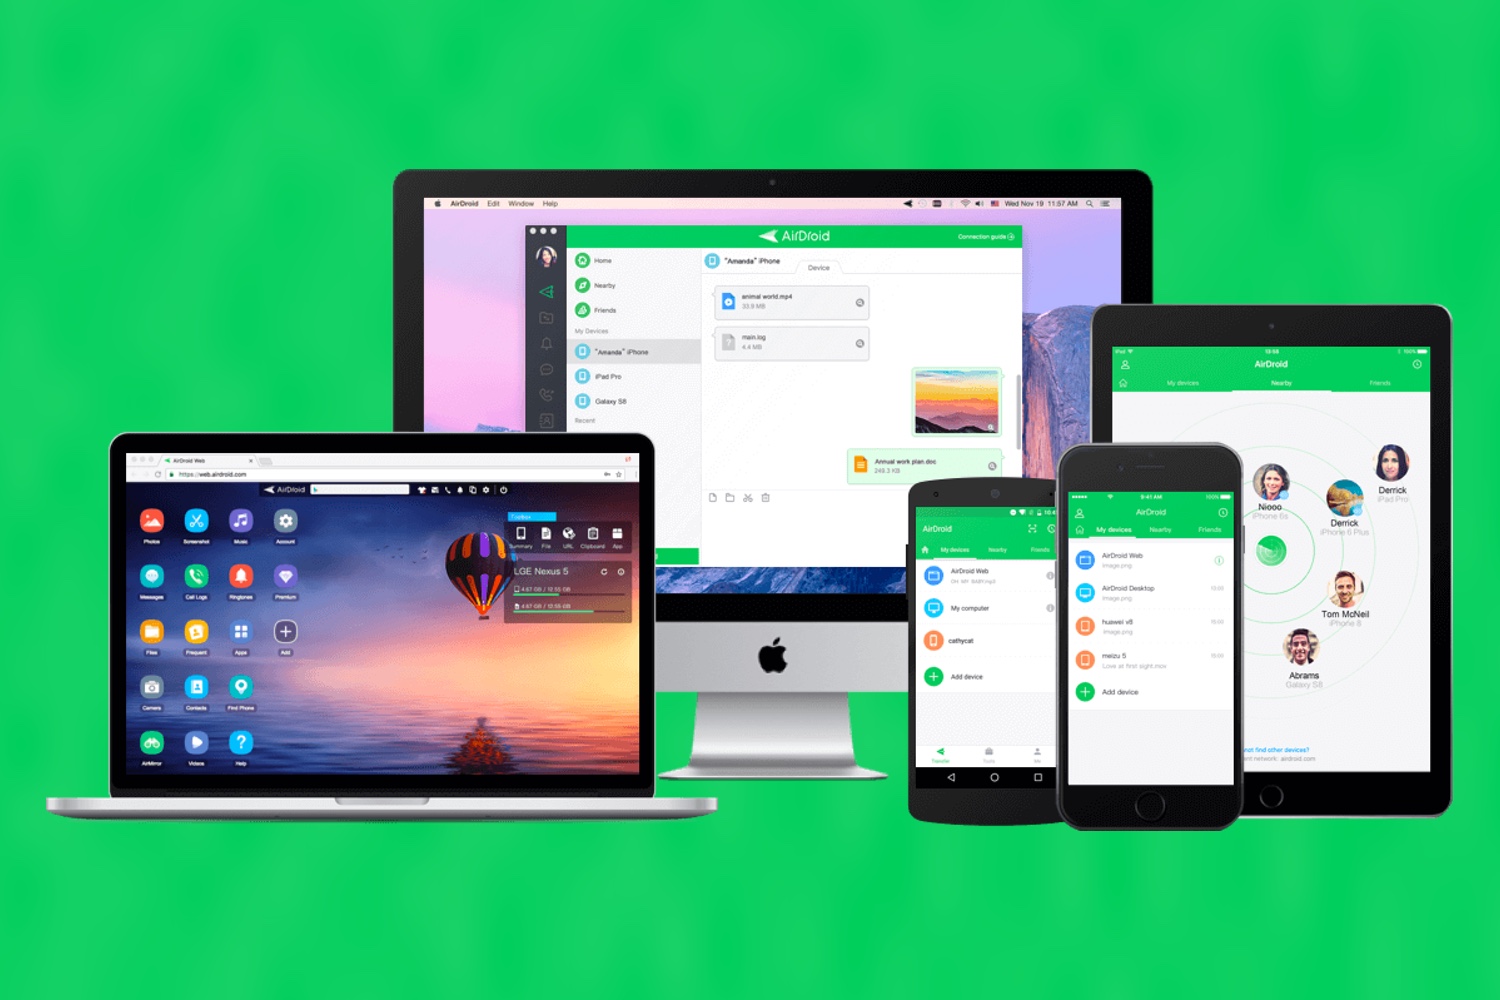 airdroid for pc